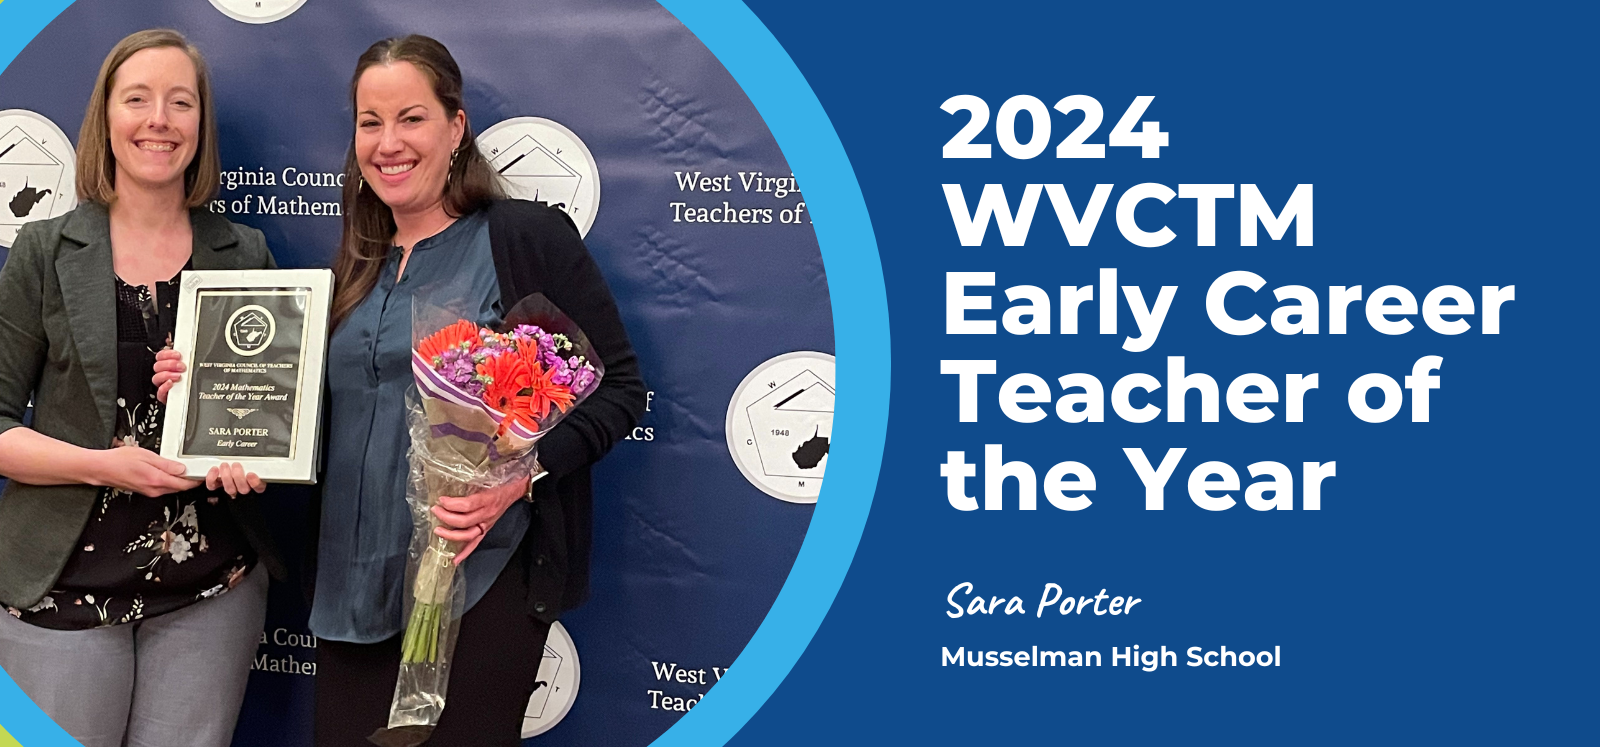 image of wvctm early career teacher of the year sara porter standing with elaine cook from musselman high school